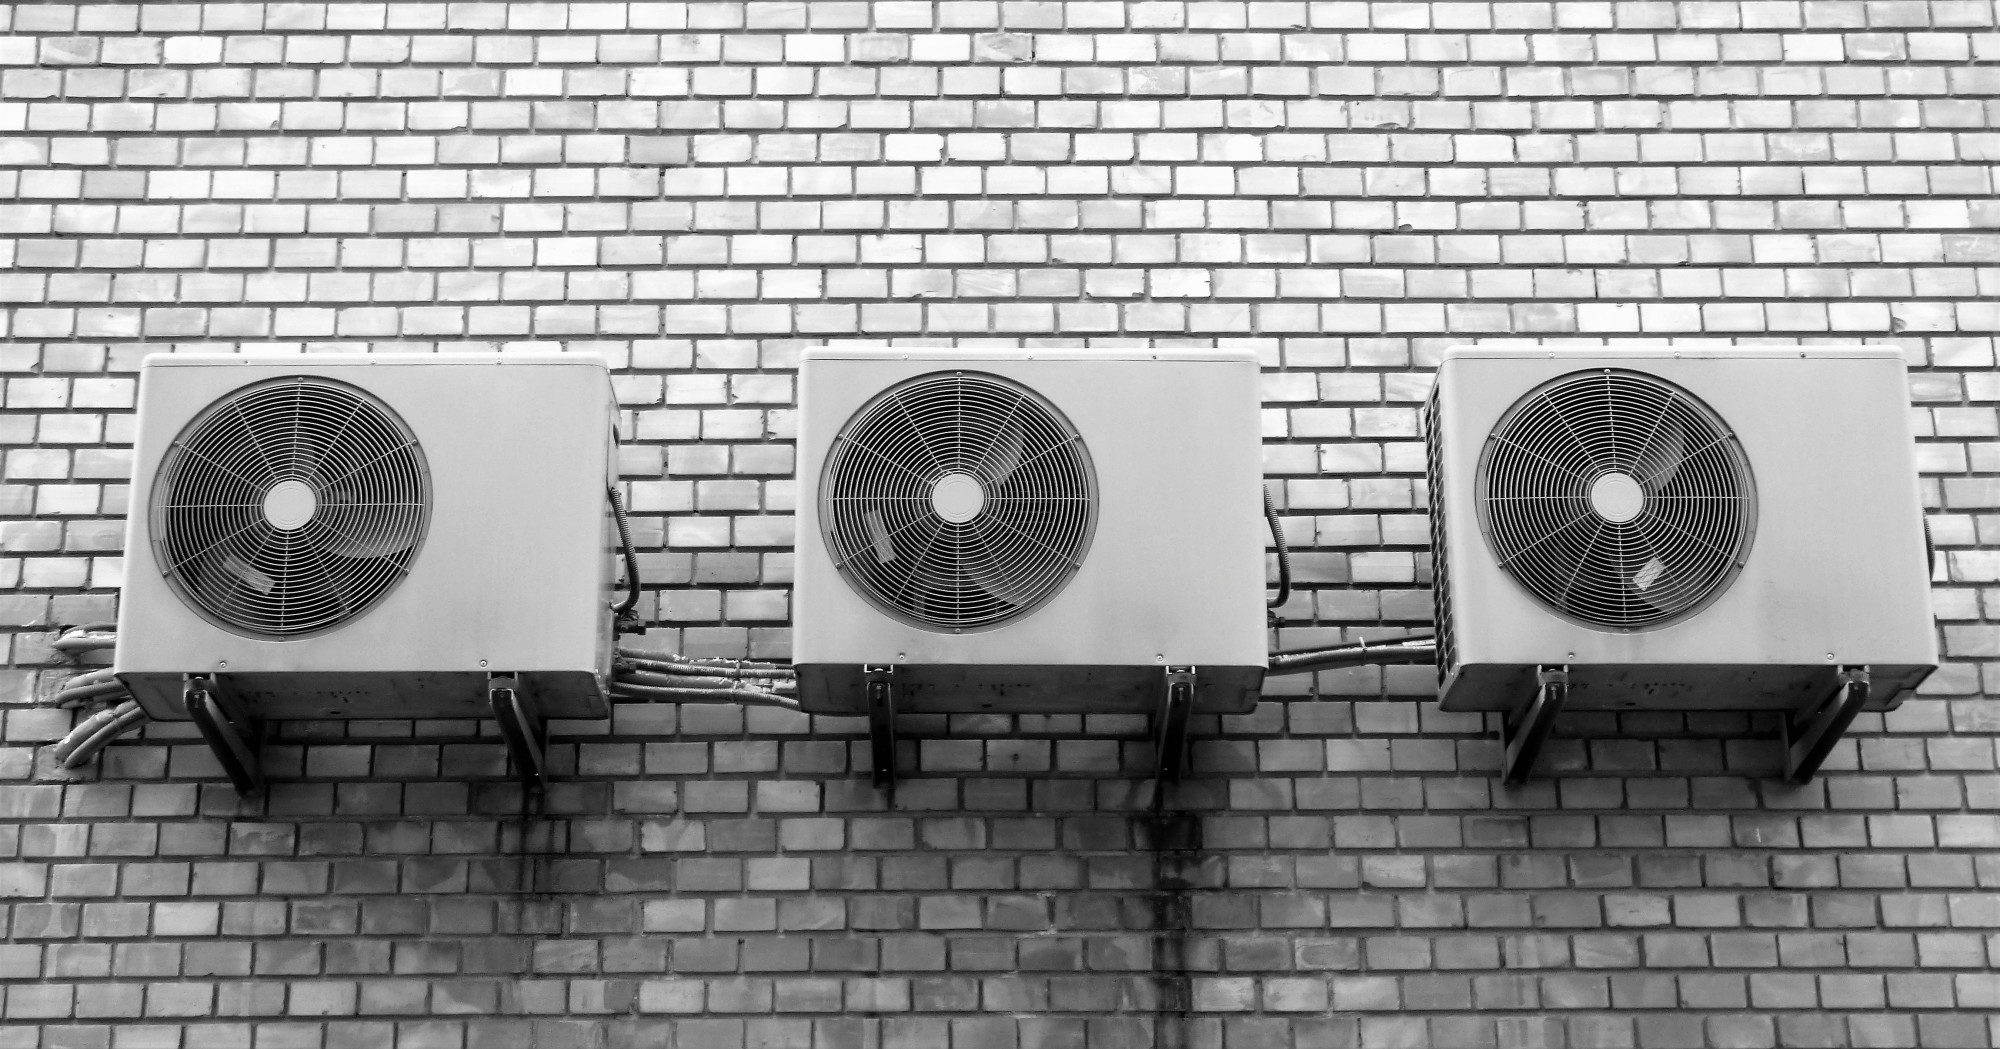 Here’s How to Quiet a Loud Air Conditioner